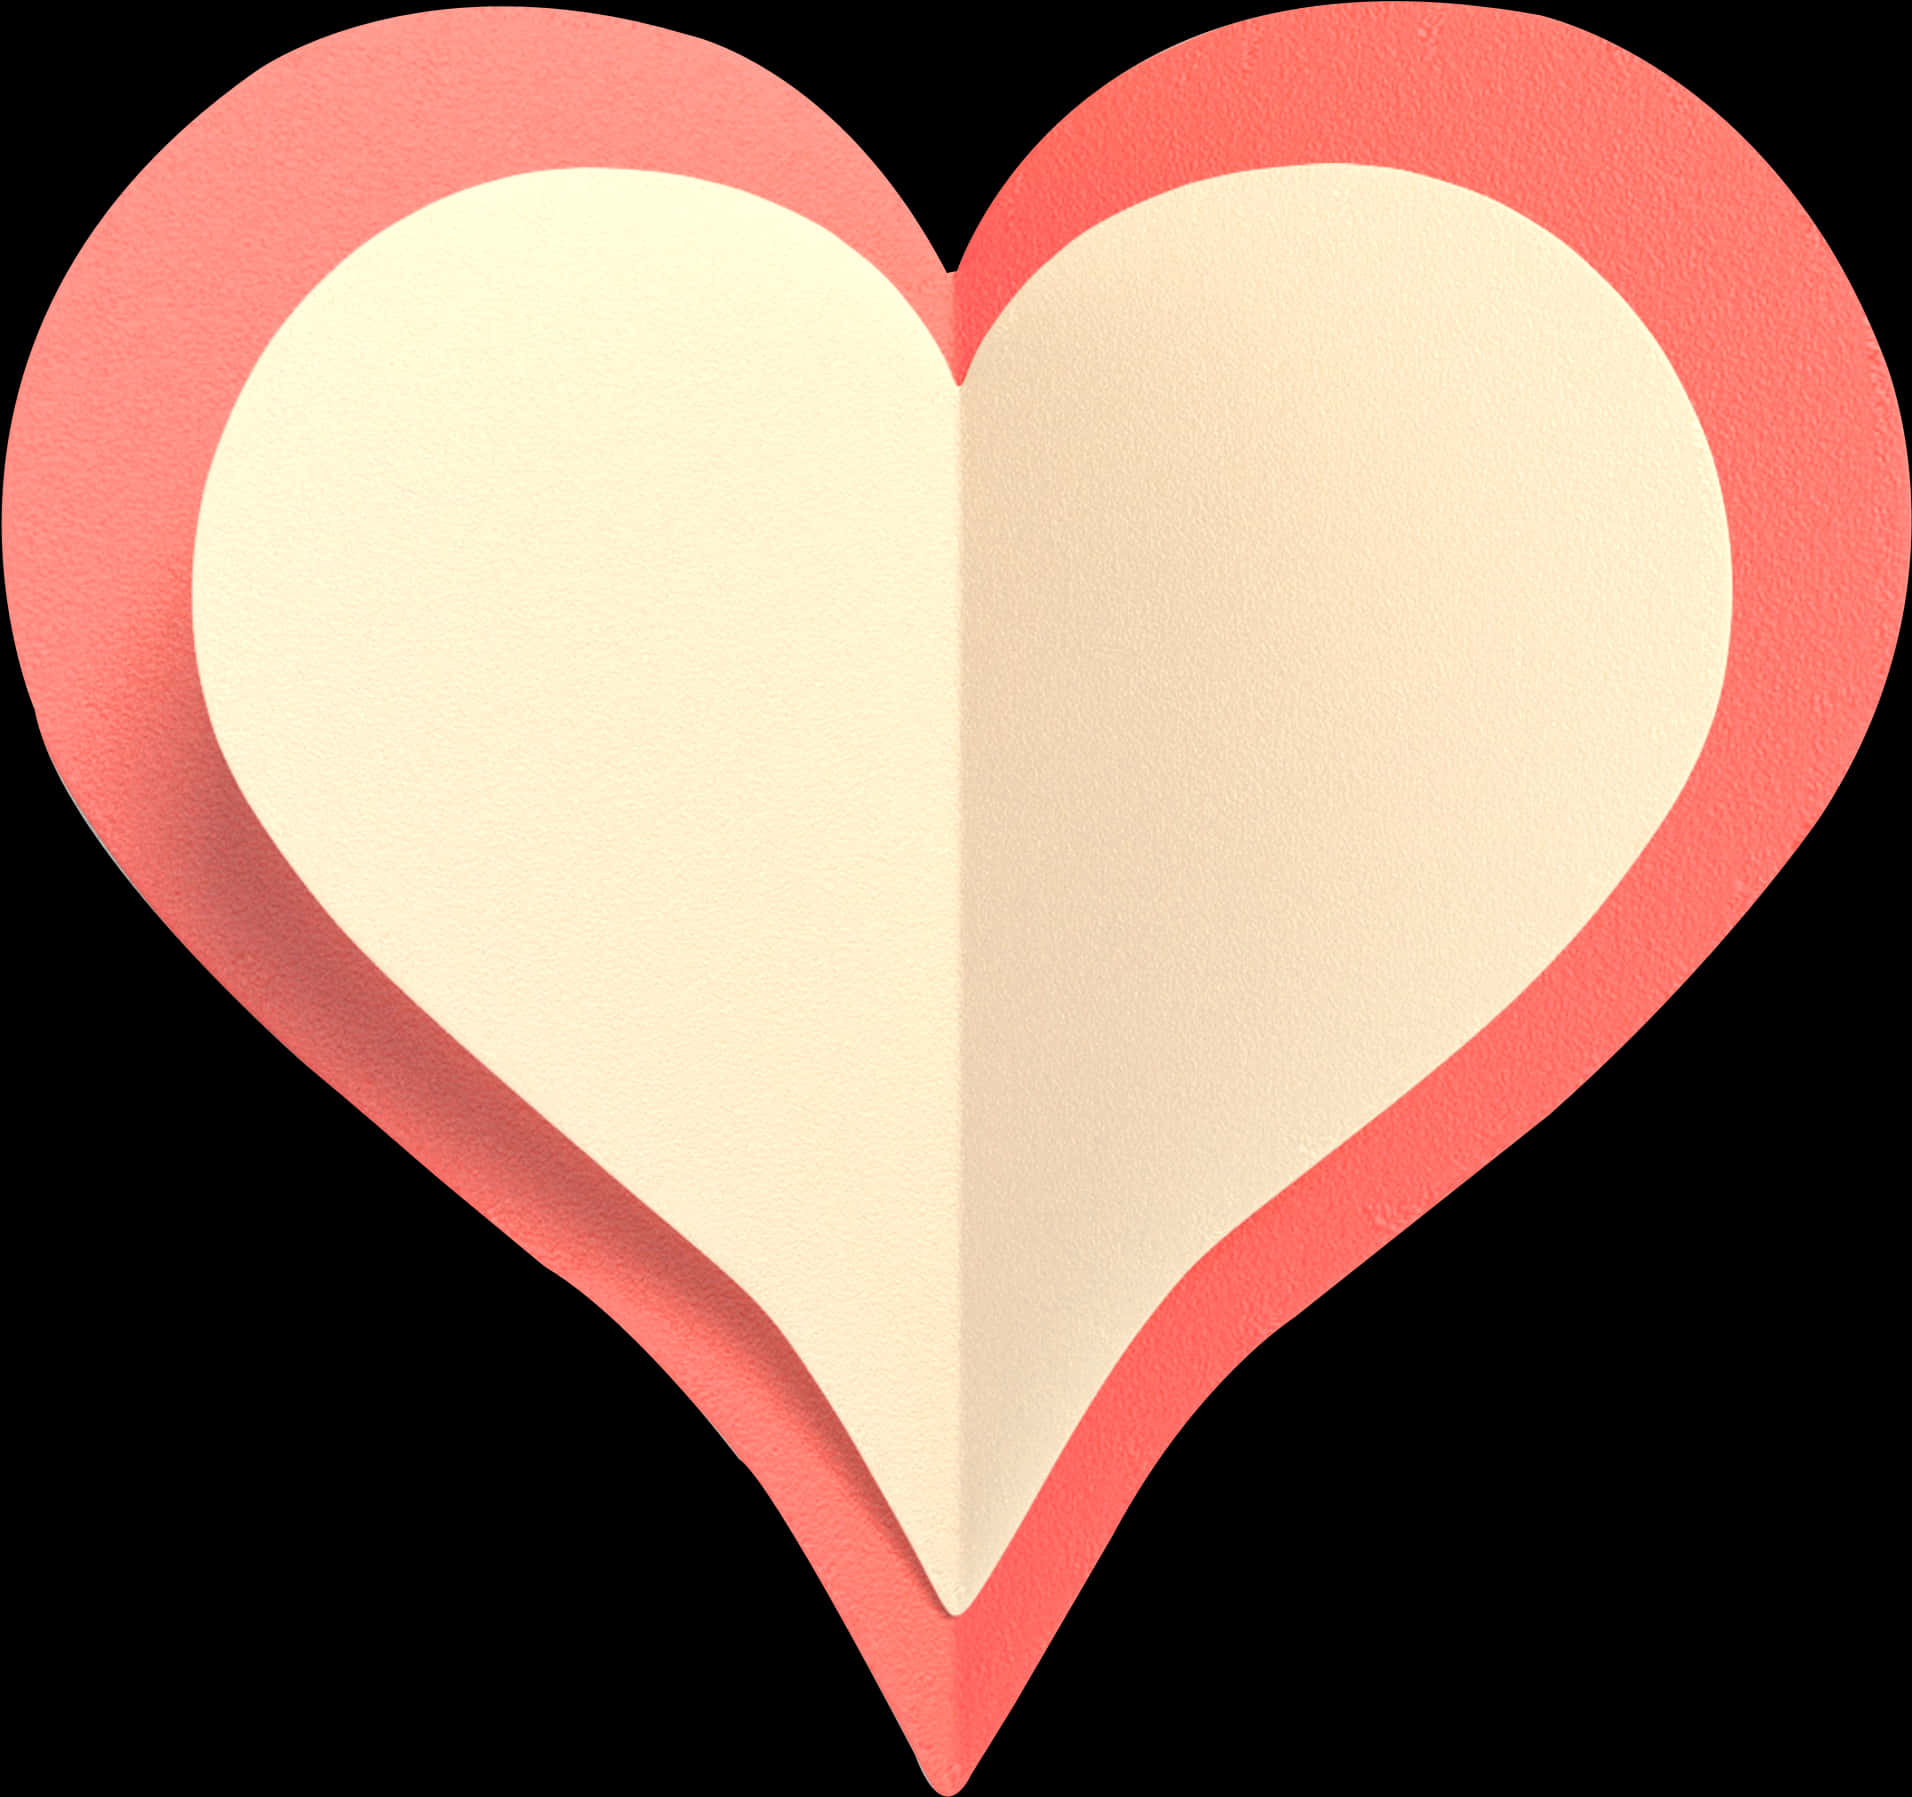 Two-layer Pink Heart Hd